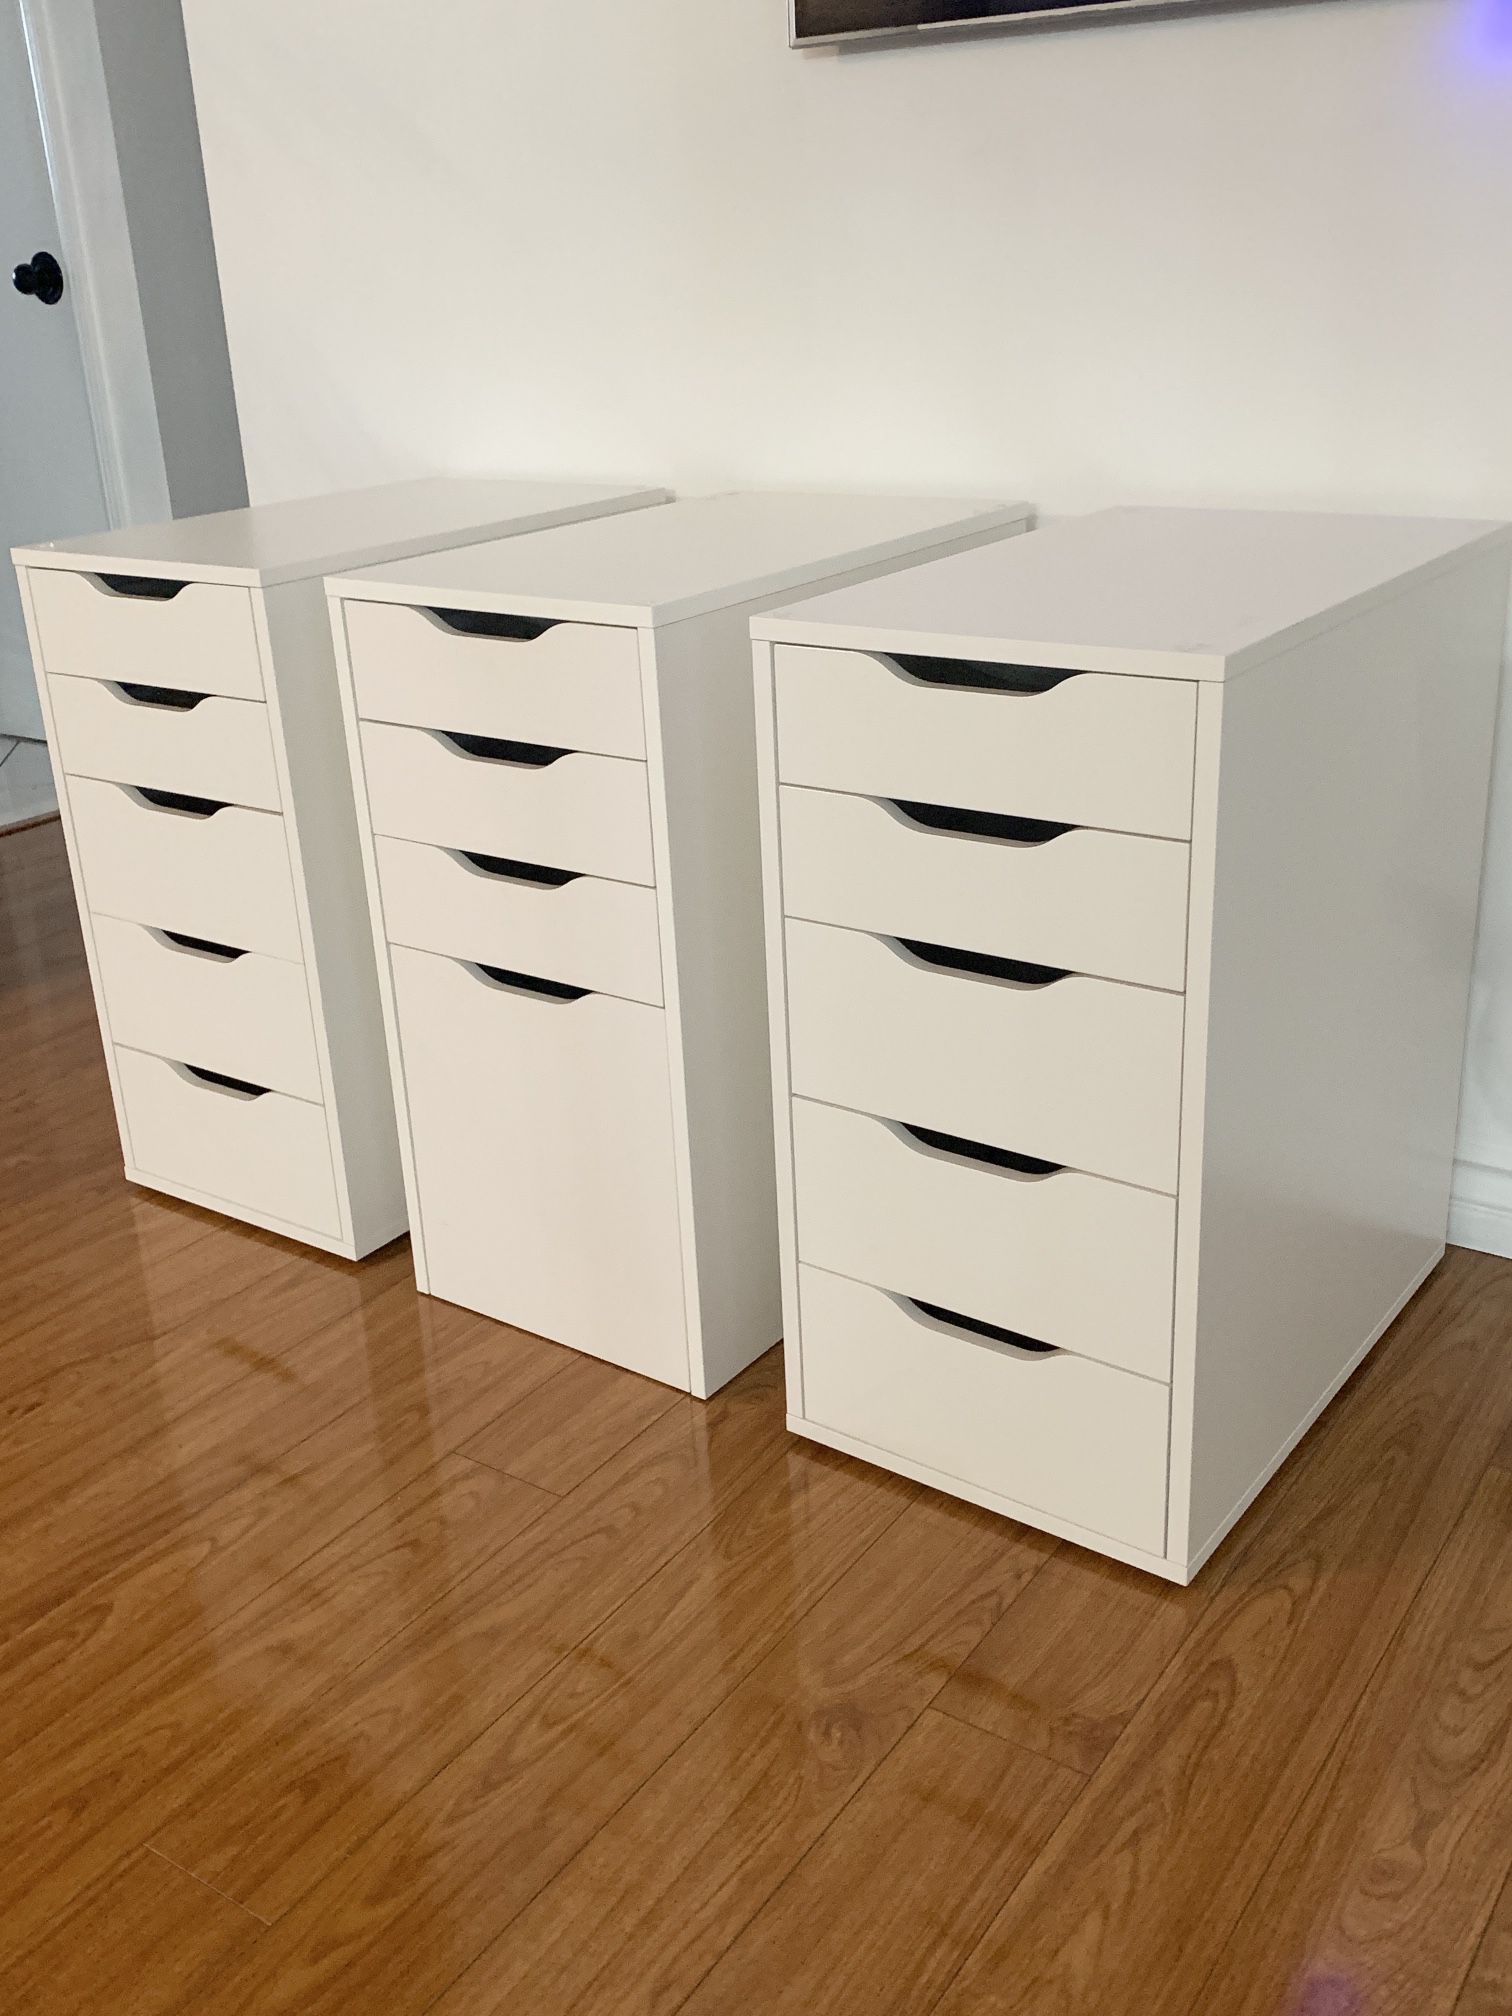 Set of 3 File Drawer Units in White